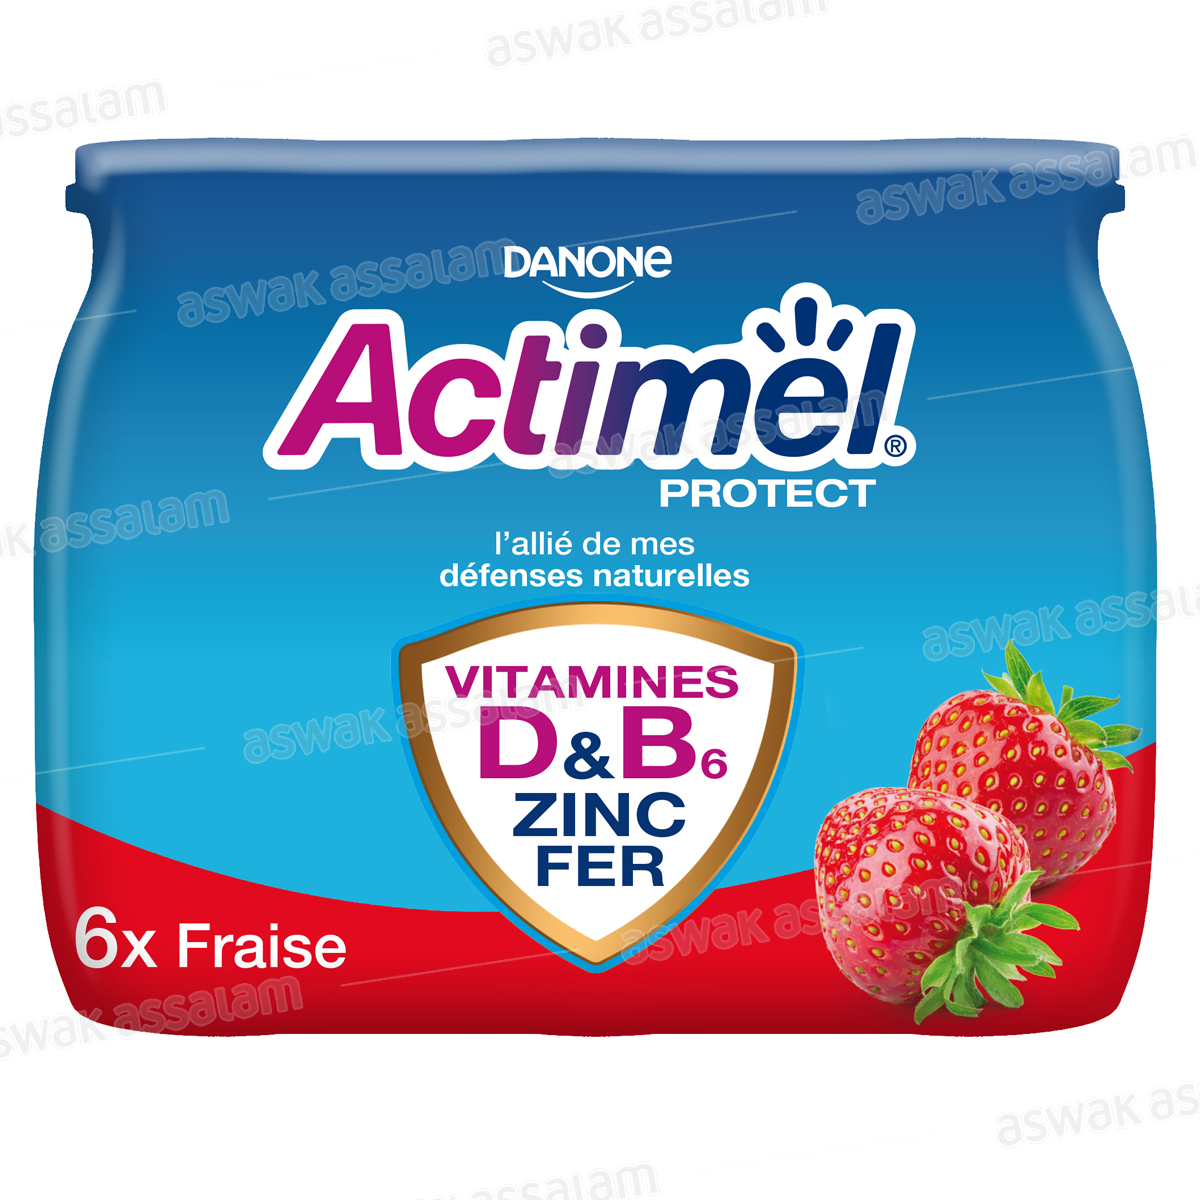 YAOURT A BOIRE ACTIMEL PROTECT FRAISE 6*100G PACK DANONE